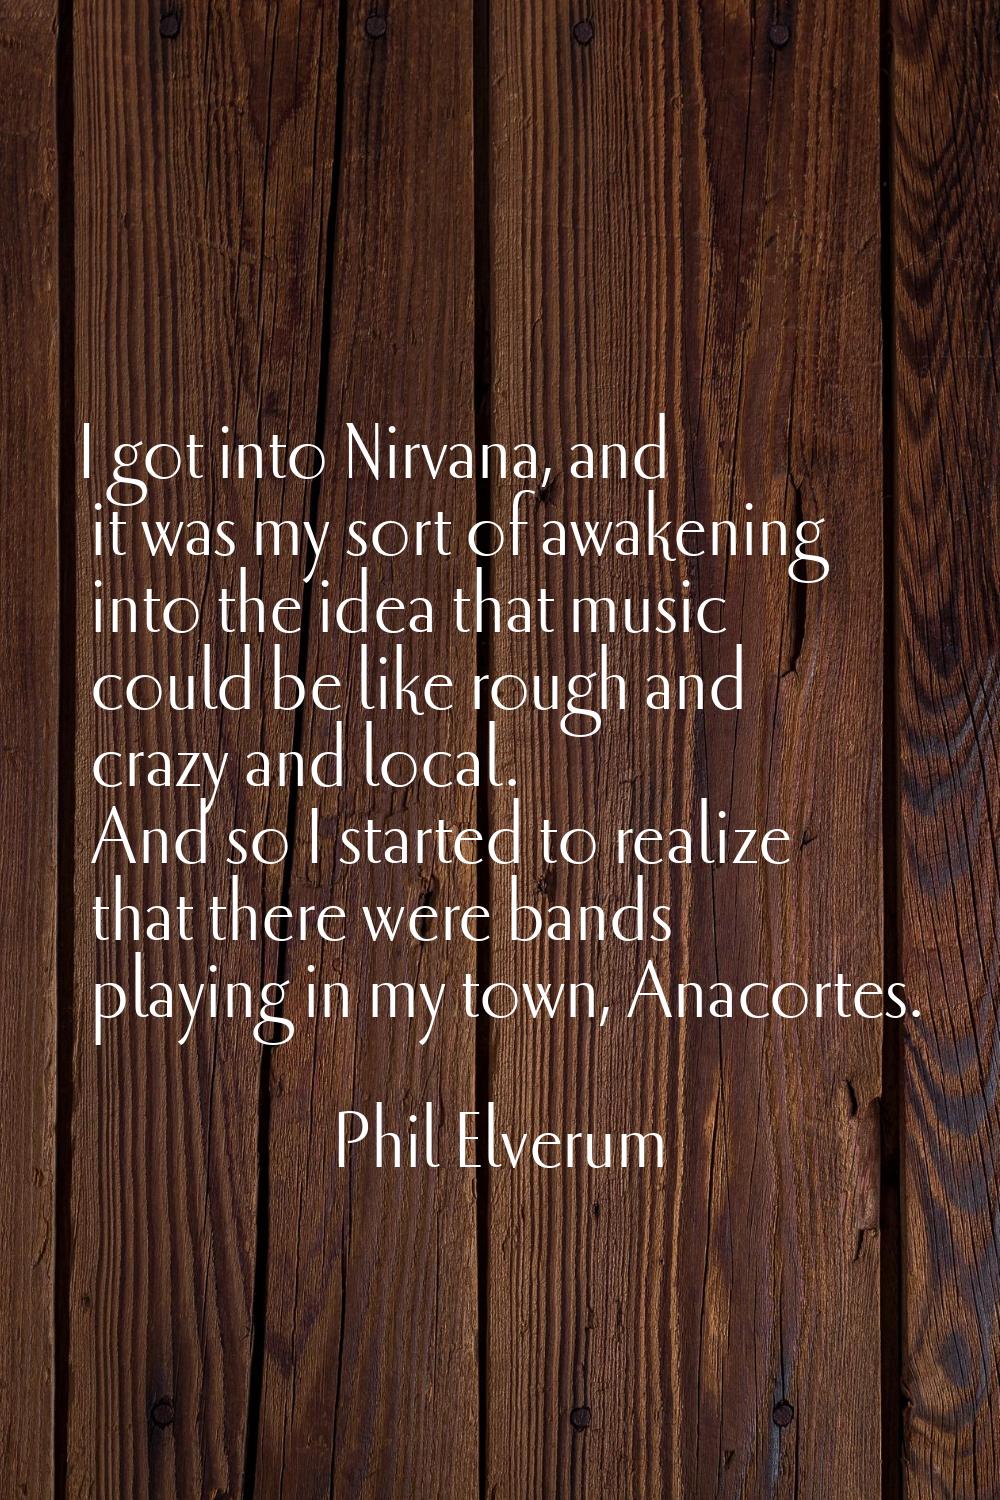 I got into Nirvana, and it was my sort of awakening into the idea that music could be like rough an